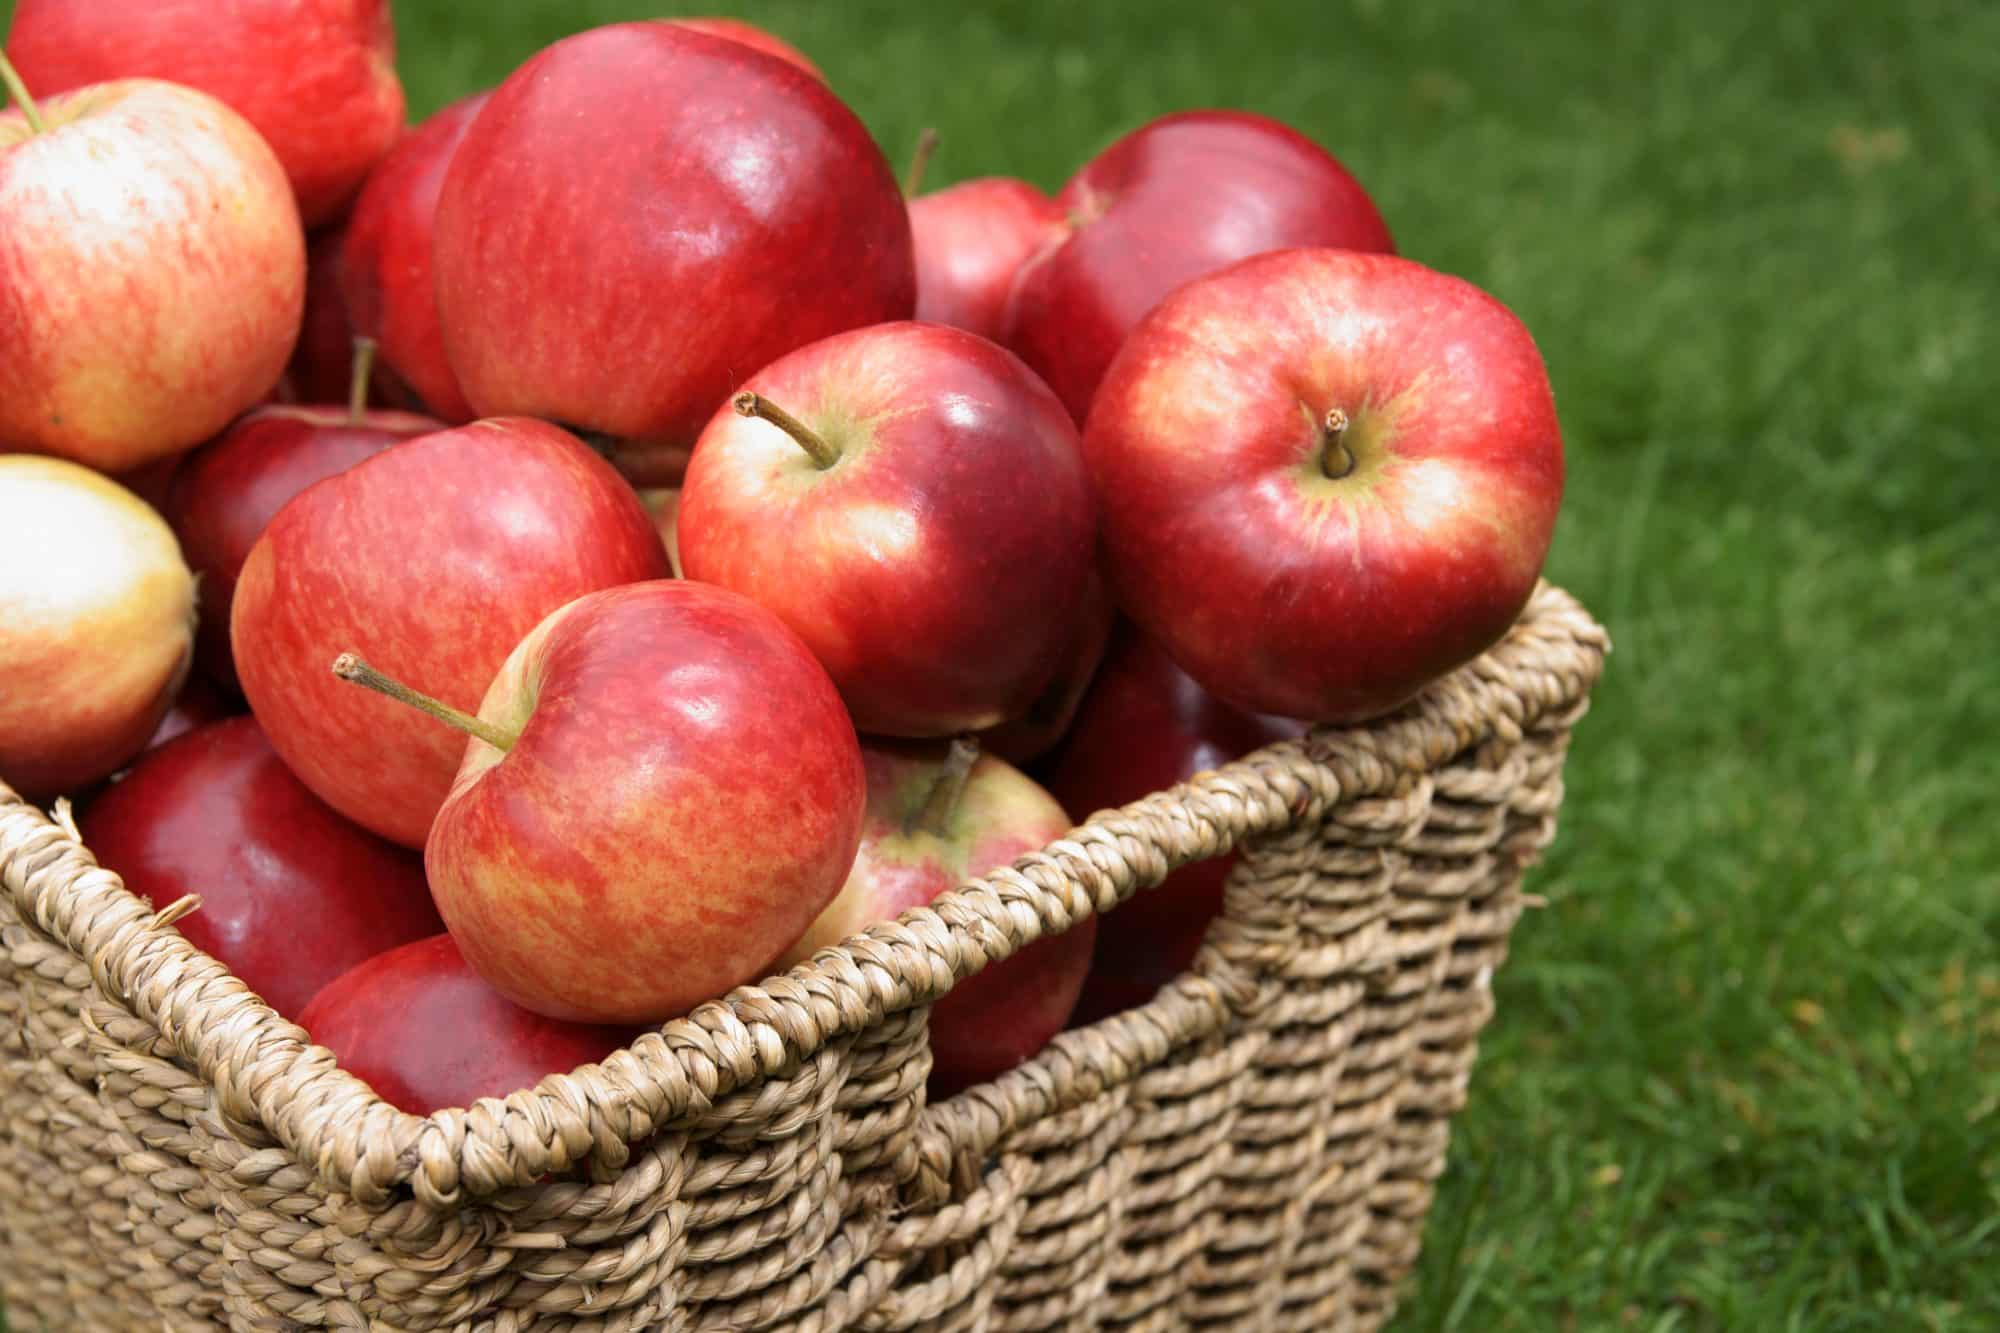 Apple Discovery Fruit Trees for Sale